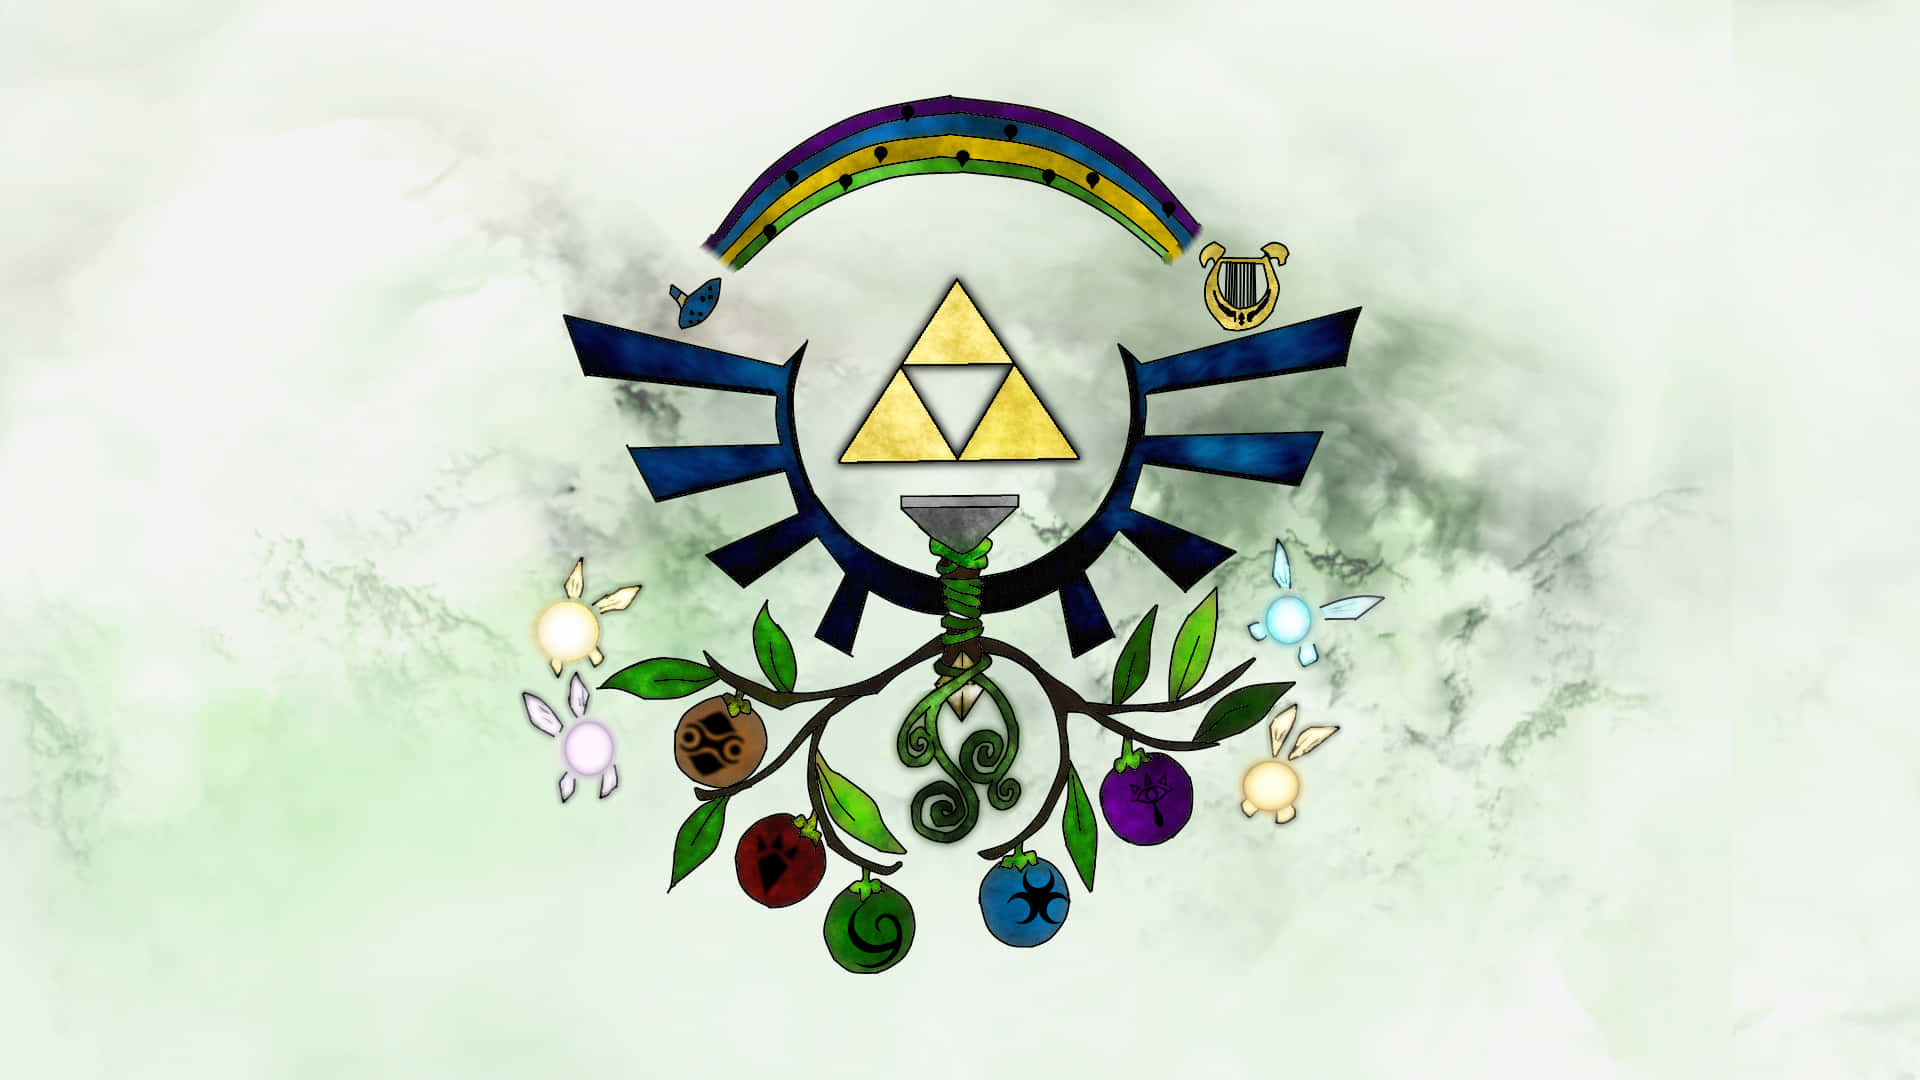 The Legend Of Zelda Logo With A Tree And A Symbol Wallpaper